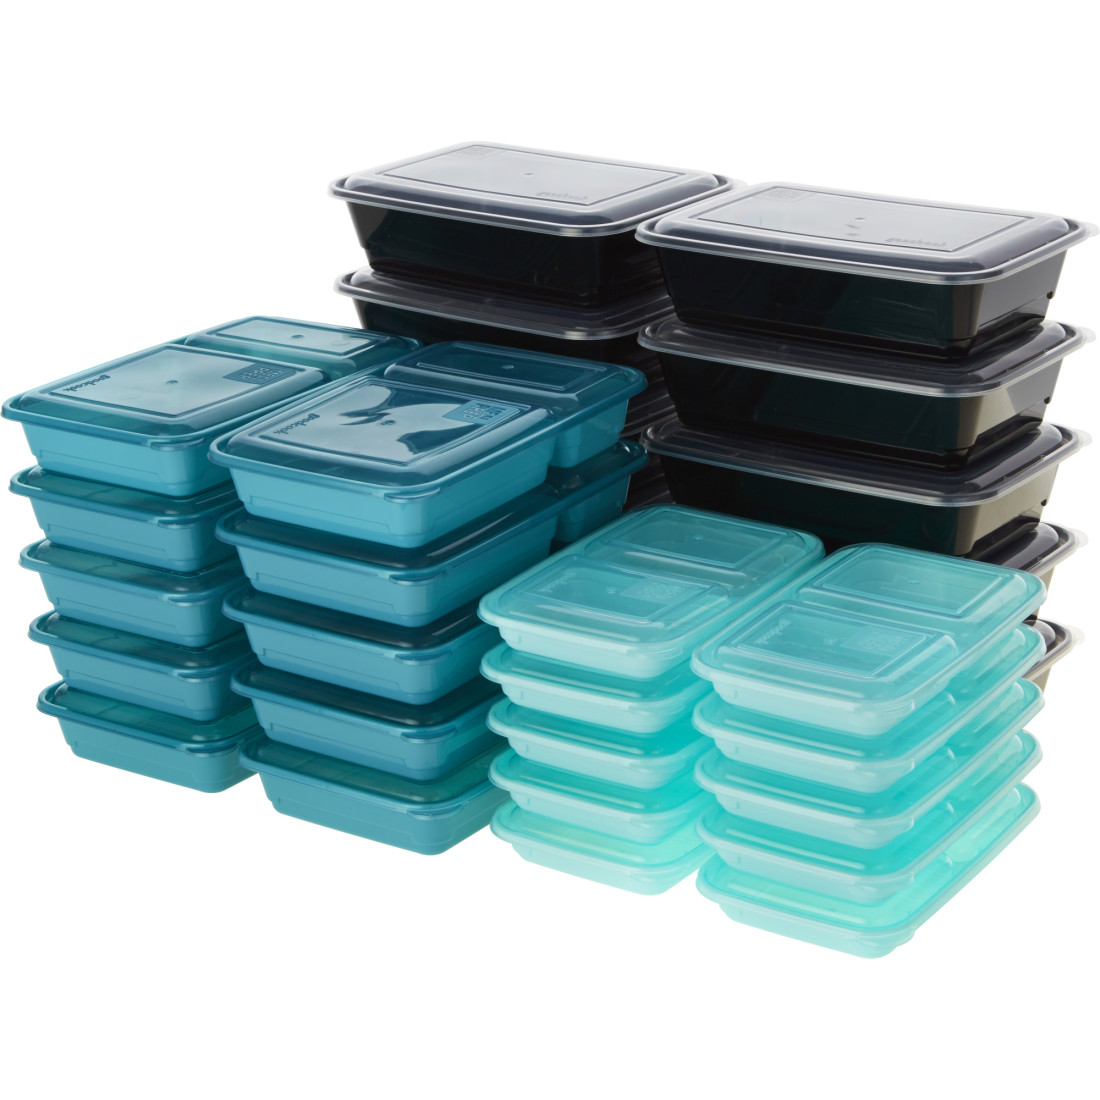 Good Cook Meal Prep Containers & Lids - 10 ct pkg